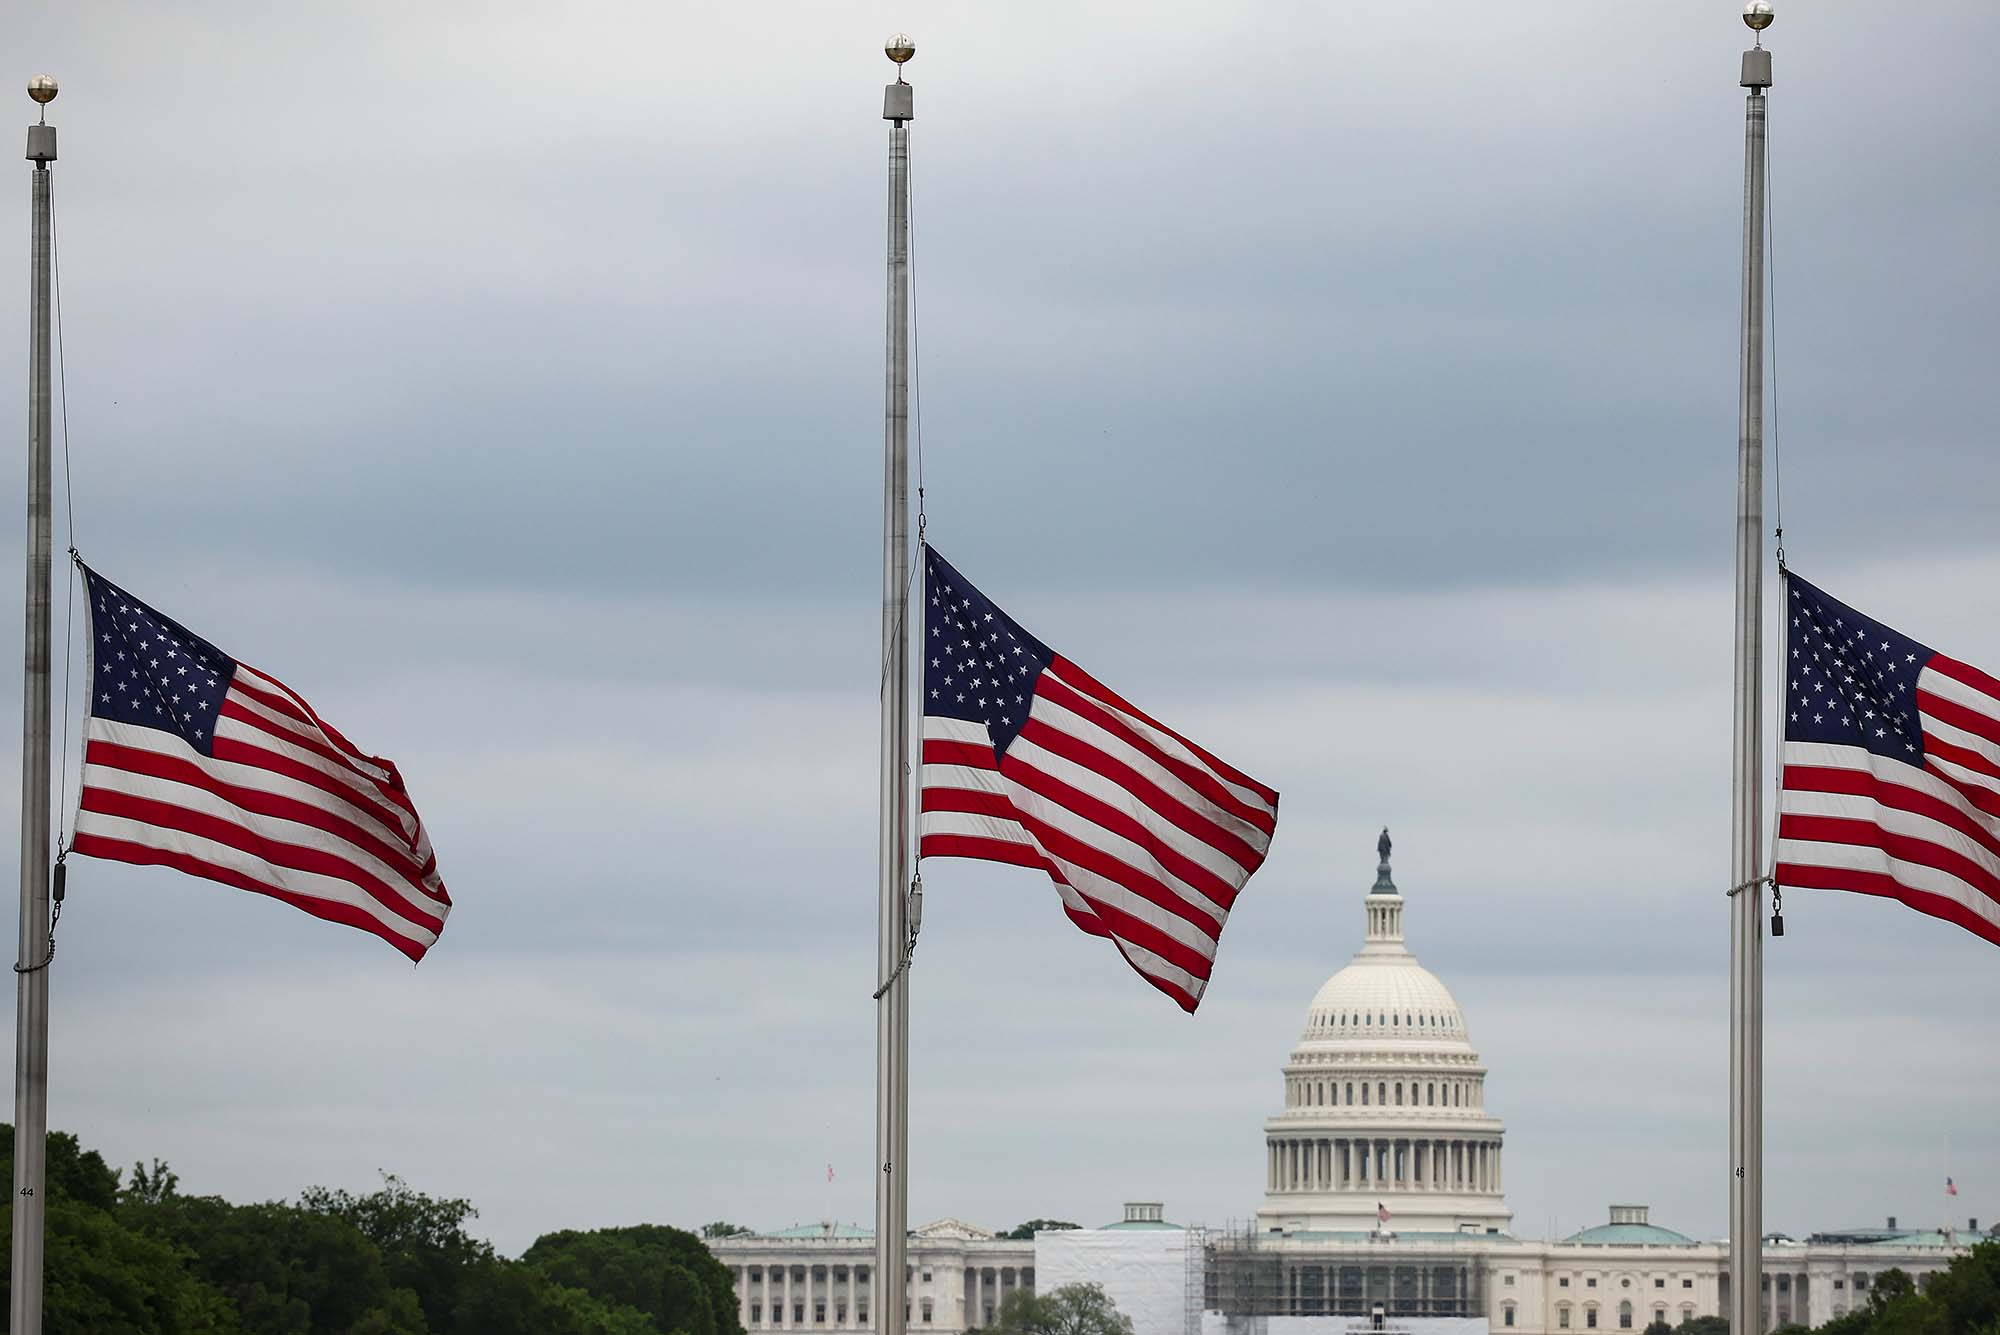 Flags fly at half-staff to commemorate the COVID-19 death toll